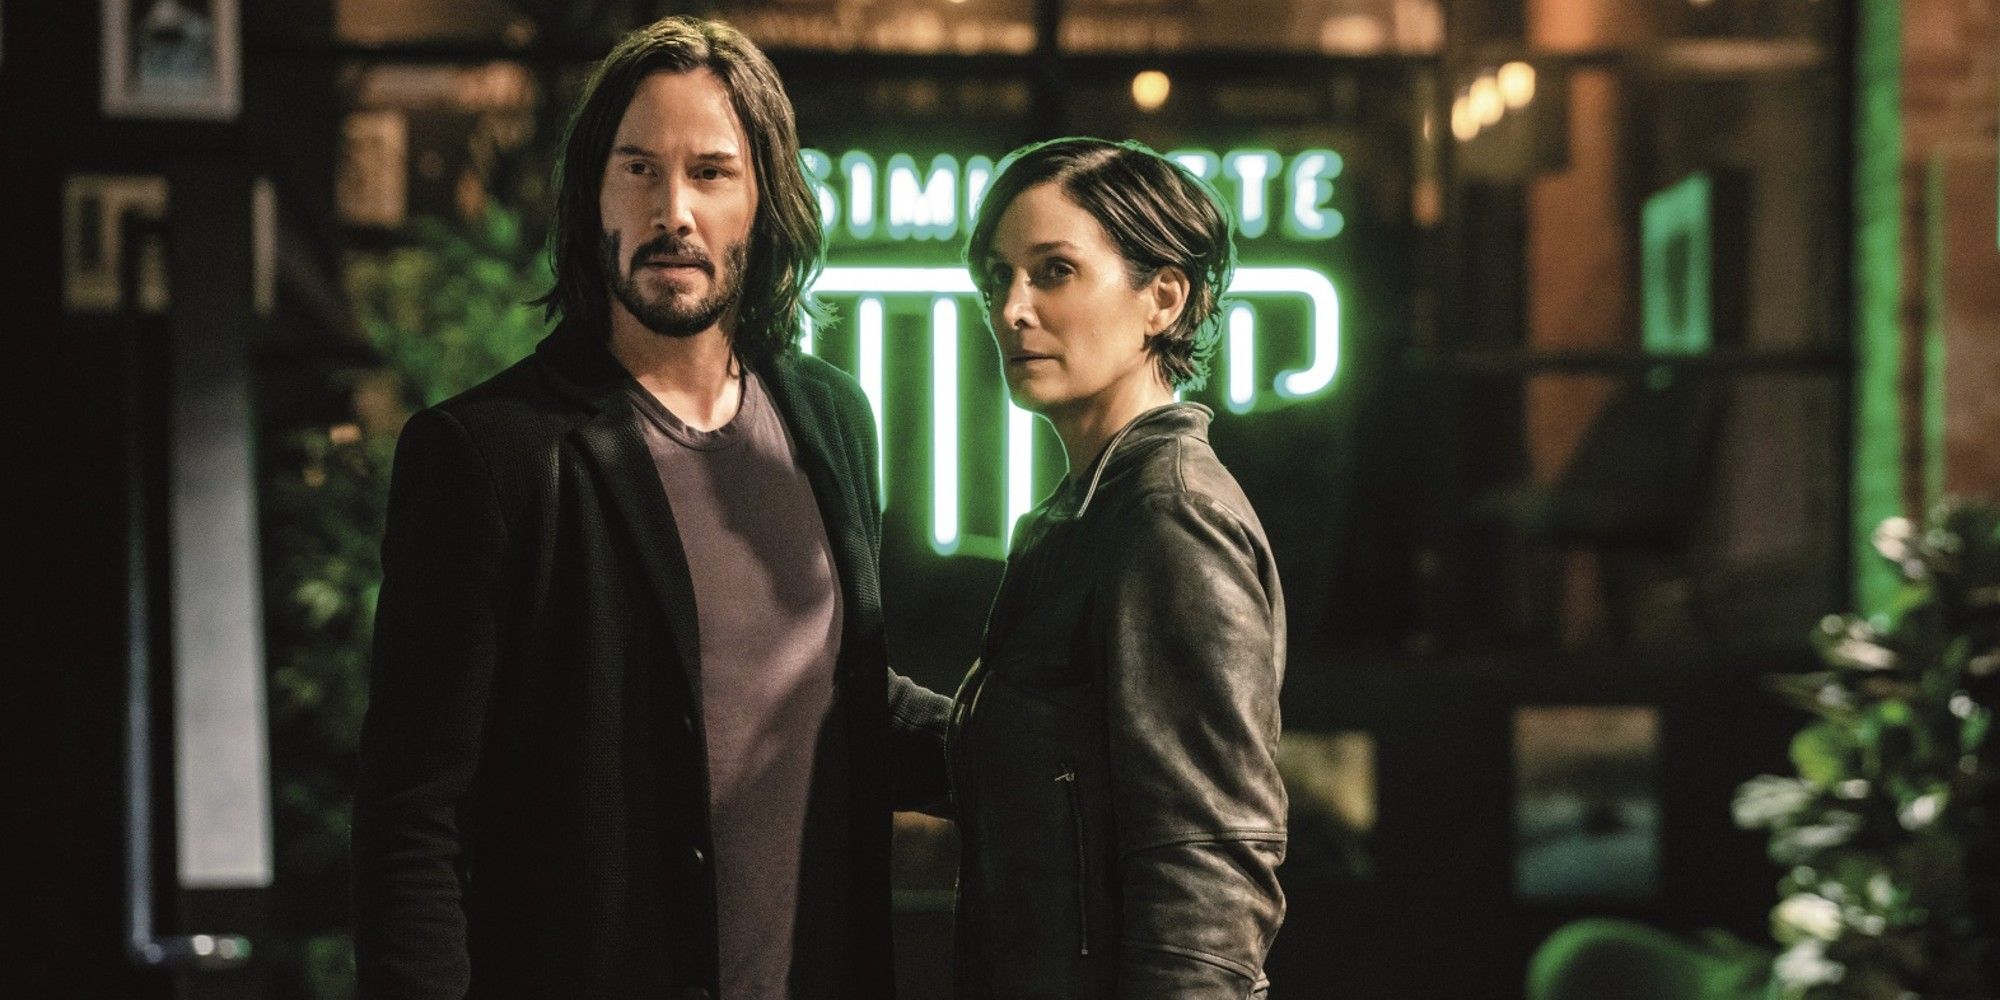 Carrie-Anne Moss and Keanu Reeves in The Matrix Resurrections